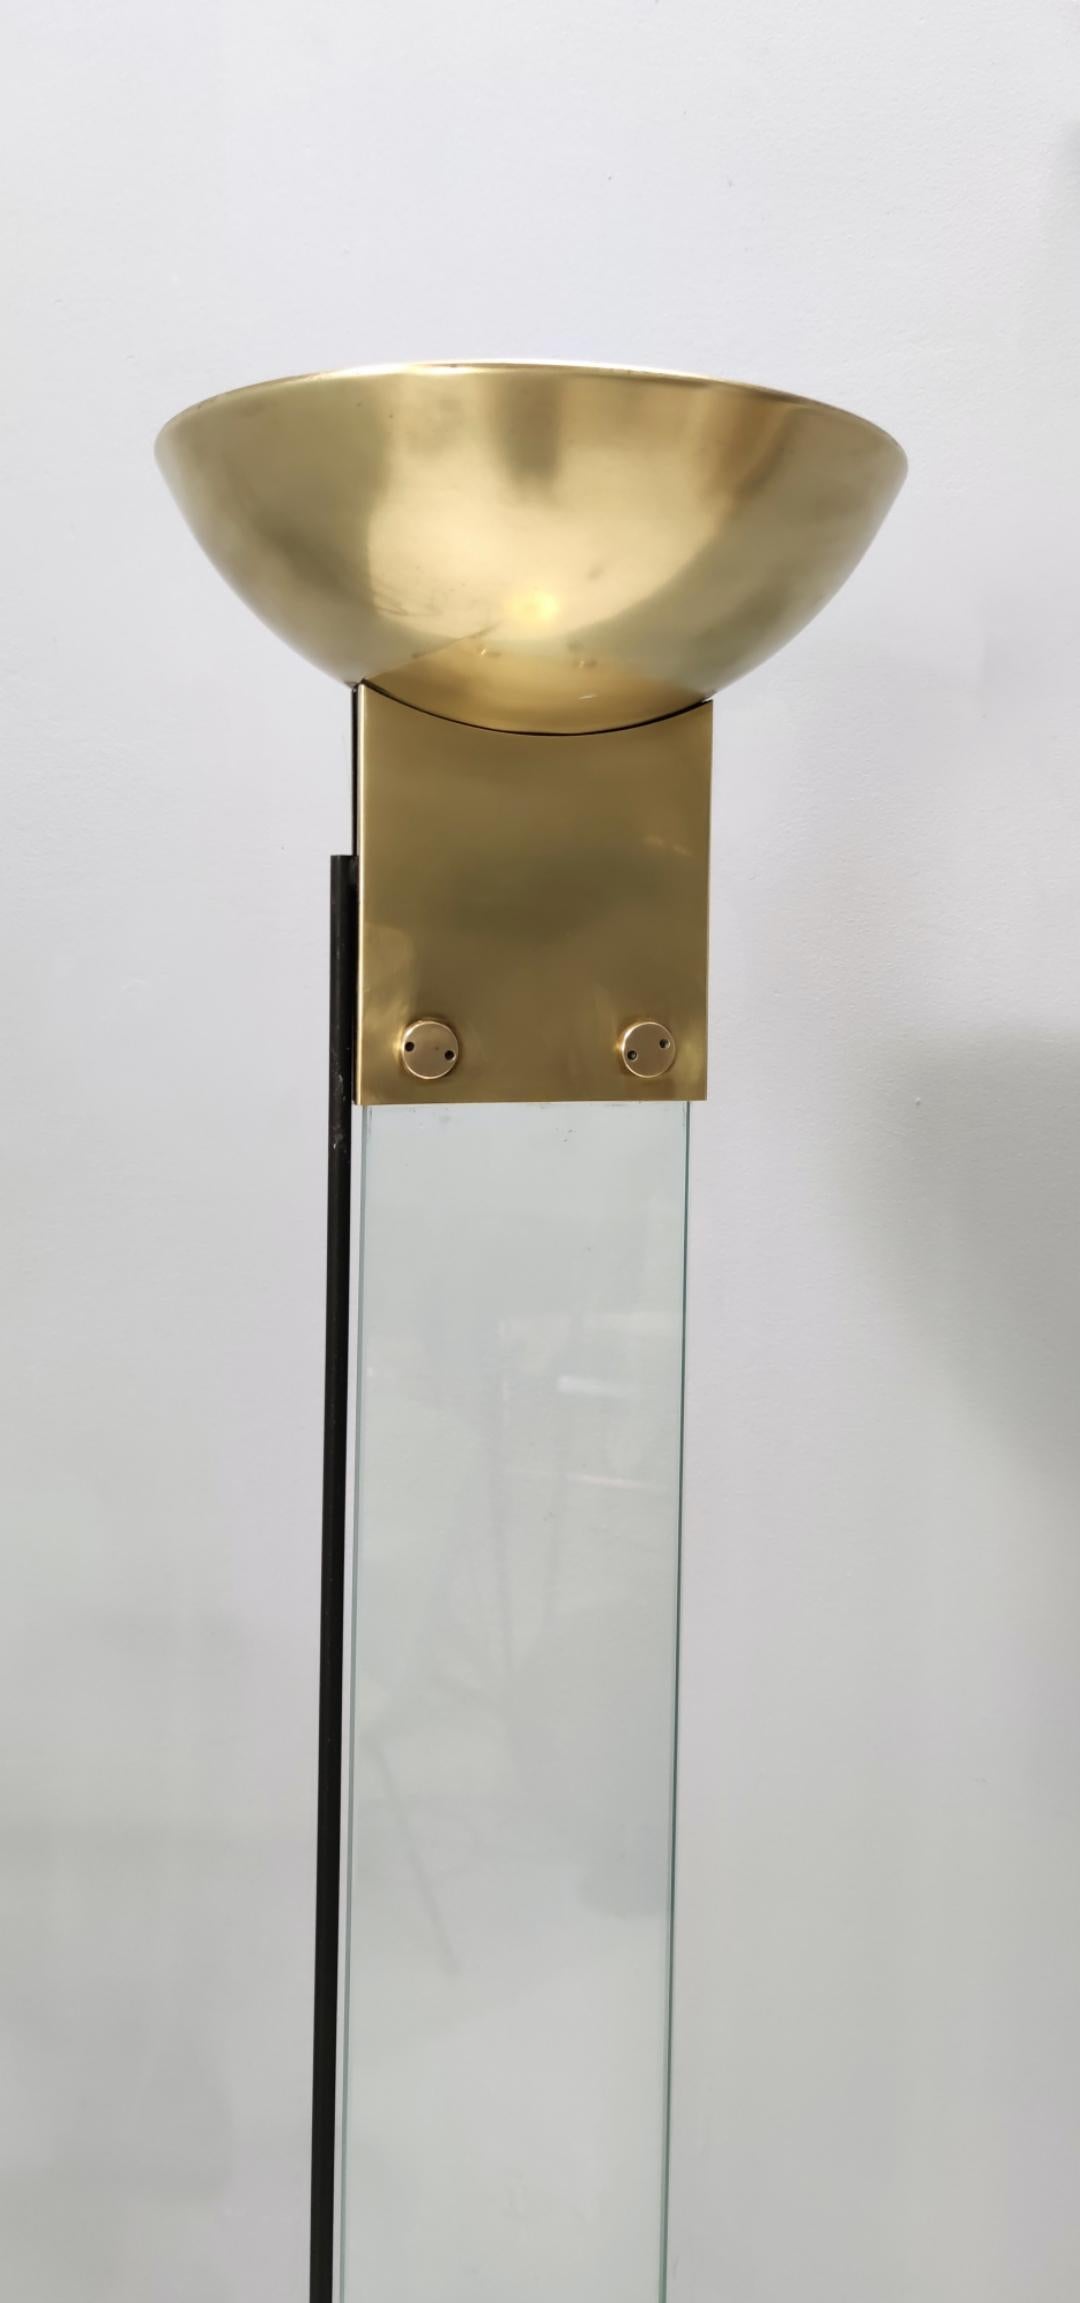 Elegant Postmodern Glass, Brass and Varnished Metal Floor Lamp, Italy, 1980s In Good Condition For Sale In Bresso, Lombardy